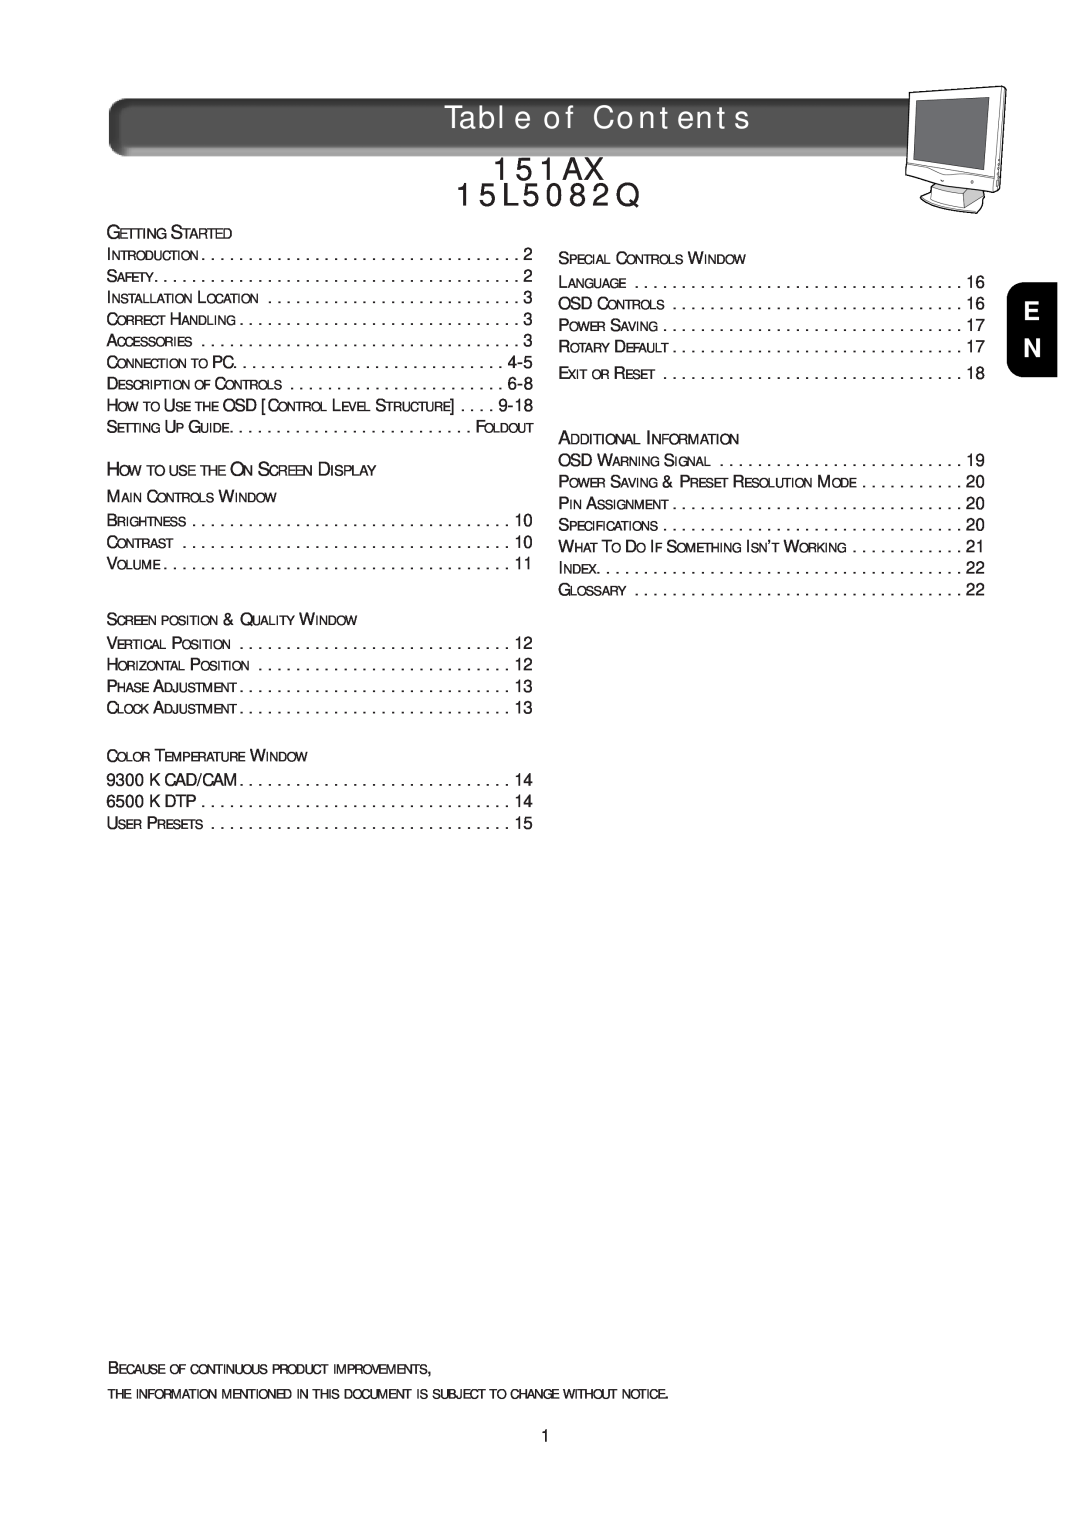 Philips specifications Table of Contents, 151AX 15L5082Q, Warranty 